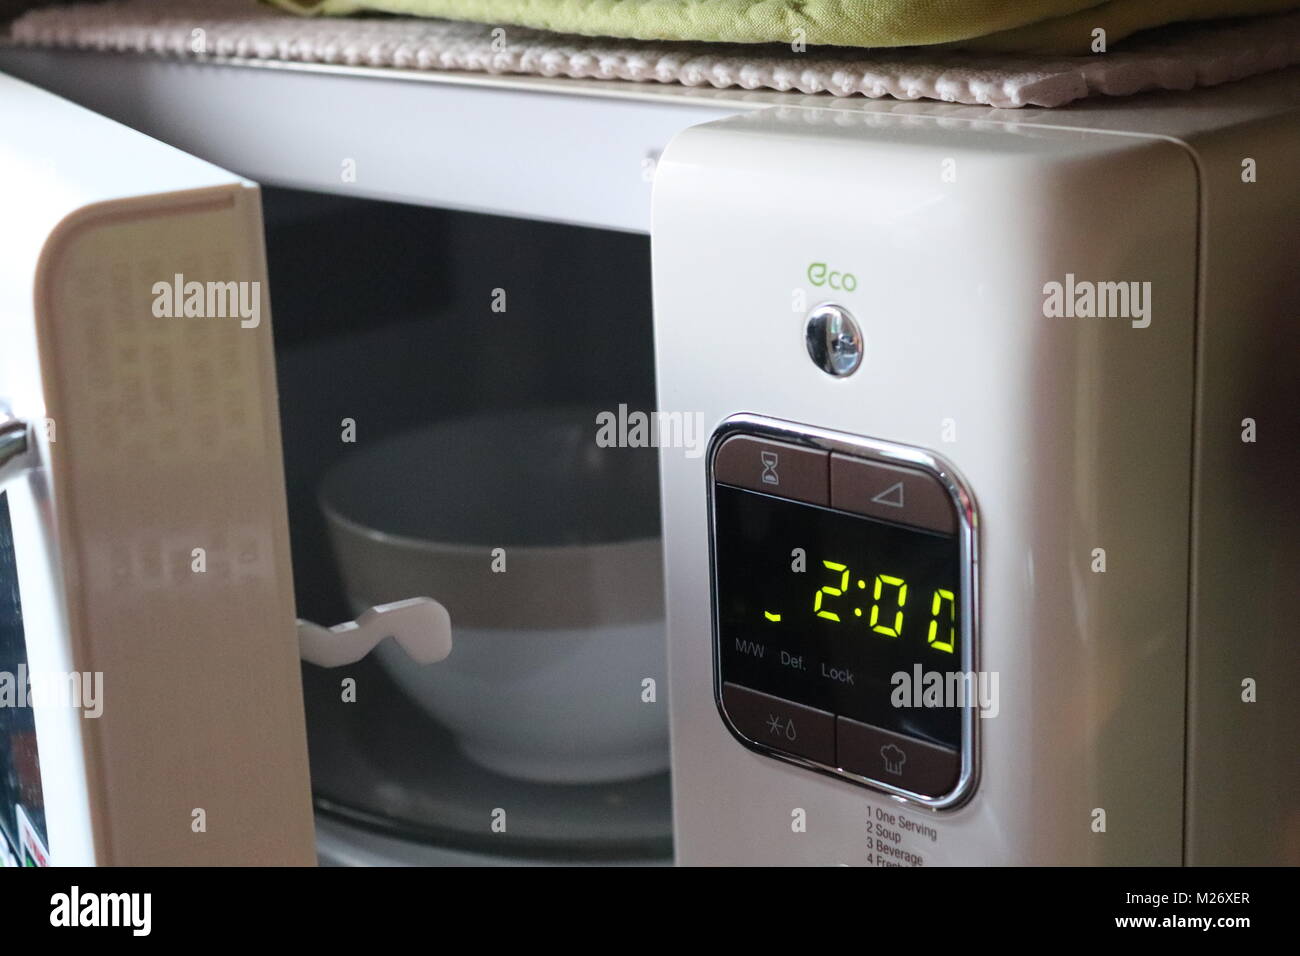 Microwave oven with door open cooking food in the kitchen Stock Photo